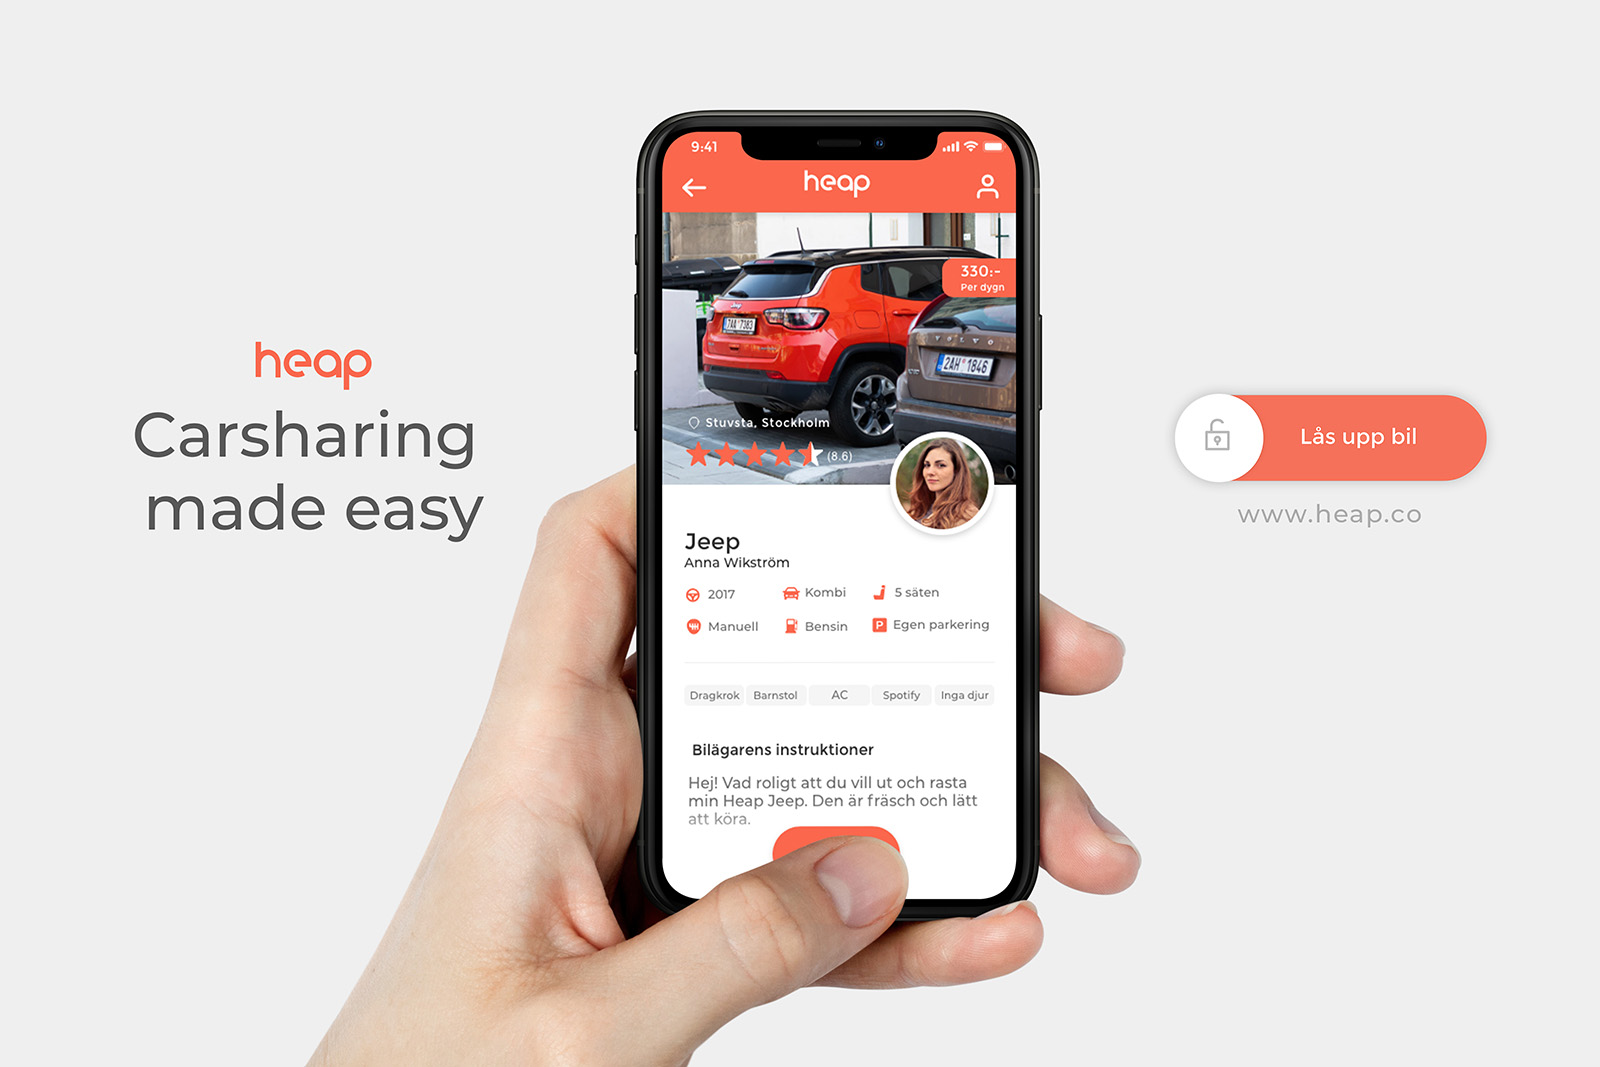 You are currently viewing Heap Carsharing expanderar – Linköping först ut